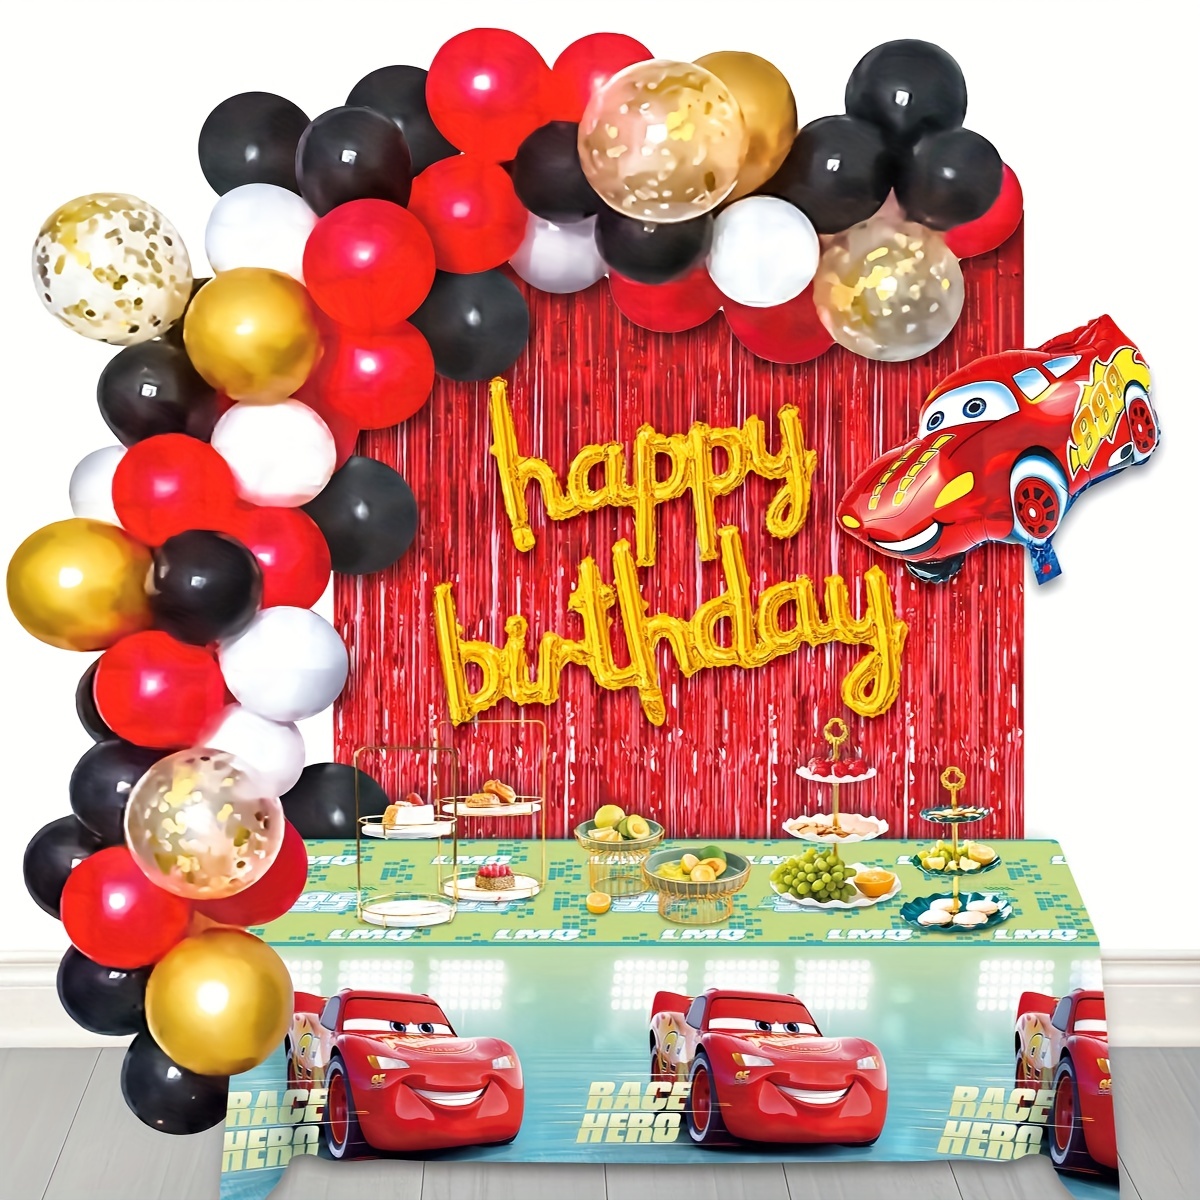  Cars Birthday Party Supplies, Lightning McQueen Birthday Party  Supplies, 12pcs Cars Gift Boxes, Candy Bags - Lightning McQueen Car  Birthday Party Favor for Cars Party Decorations : Toys & Games